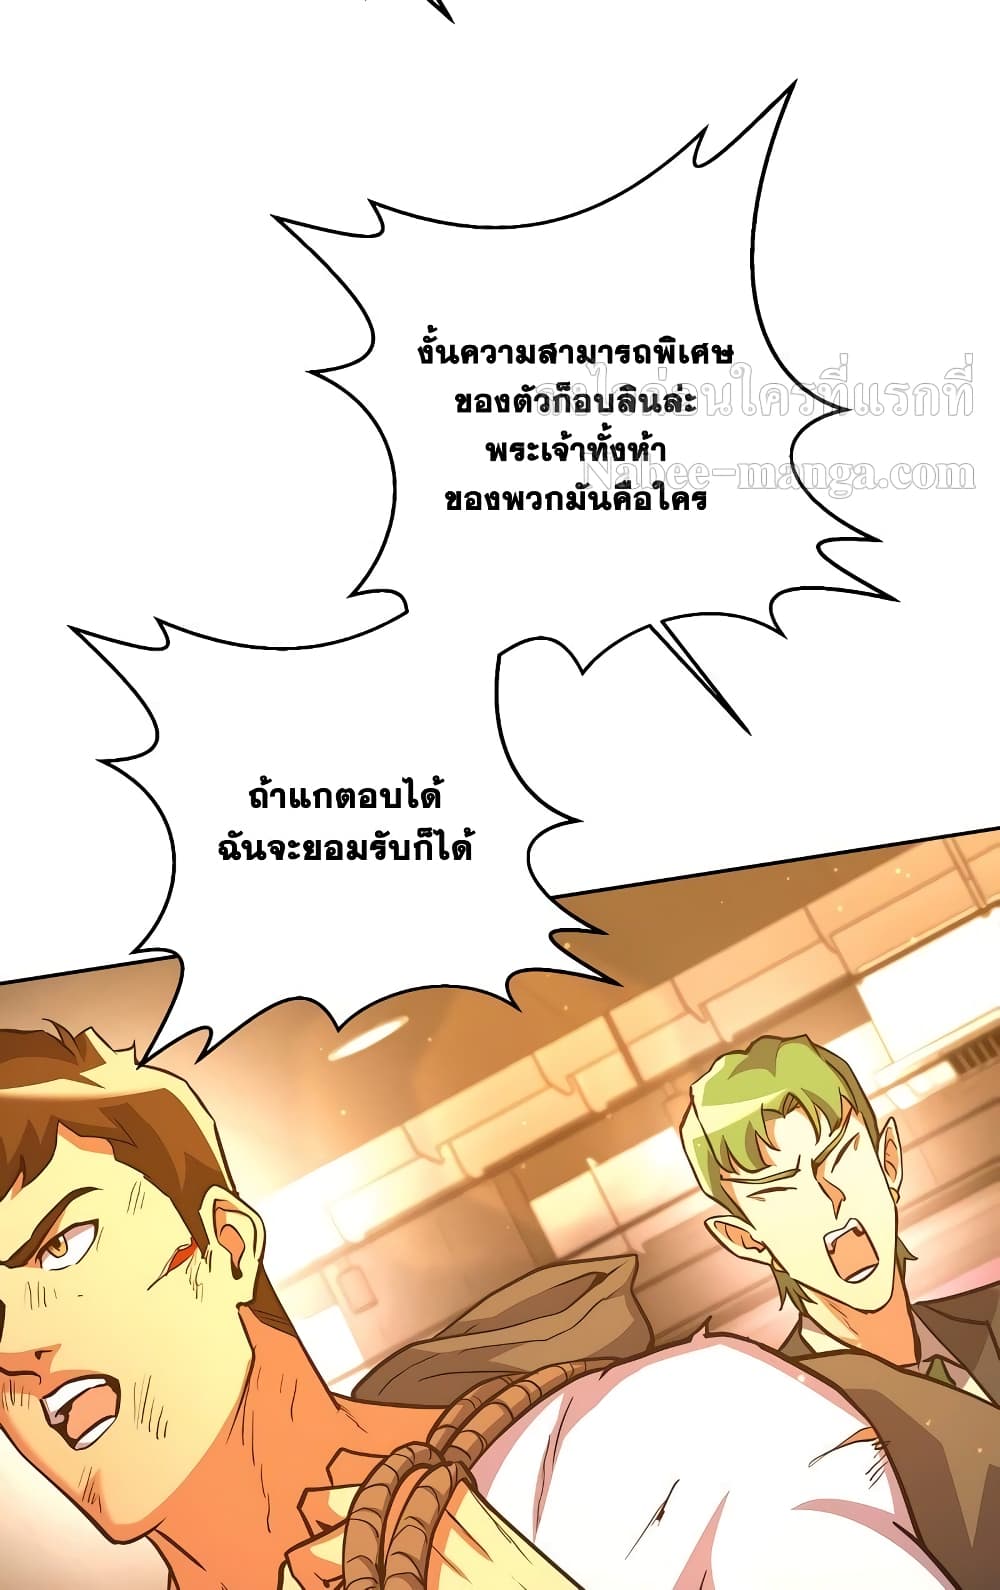 Surviving in an Action Manhwa 6 081